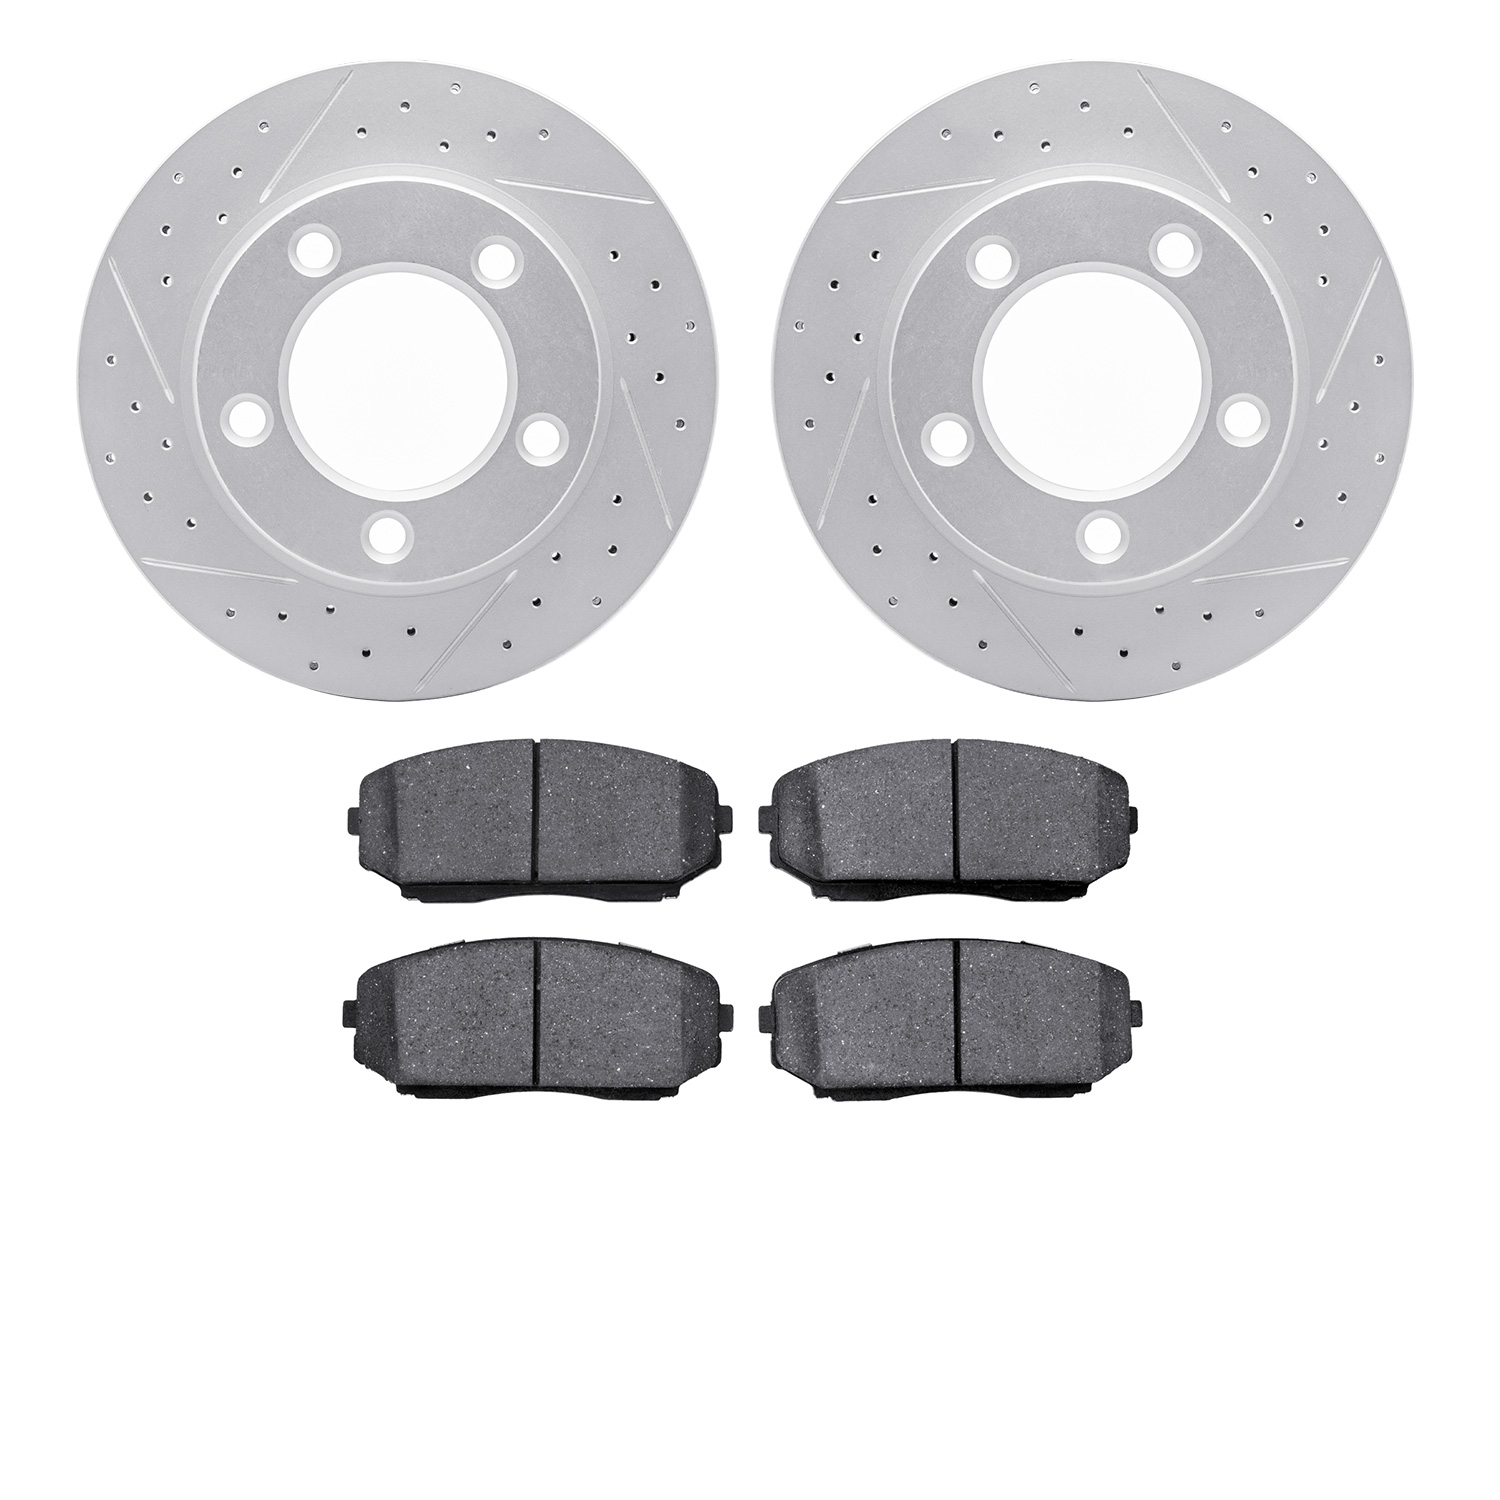 2502-54089 Geoperformance Drilled/Slotted Rotors w/5000 Advanced Brake Pads Kit, 2007-2015 Ford/Lincoln/Mercury/Mazda, Position: